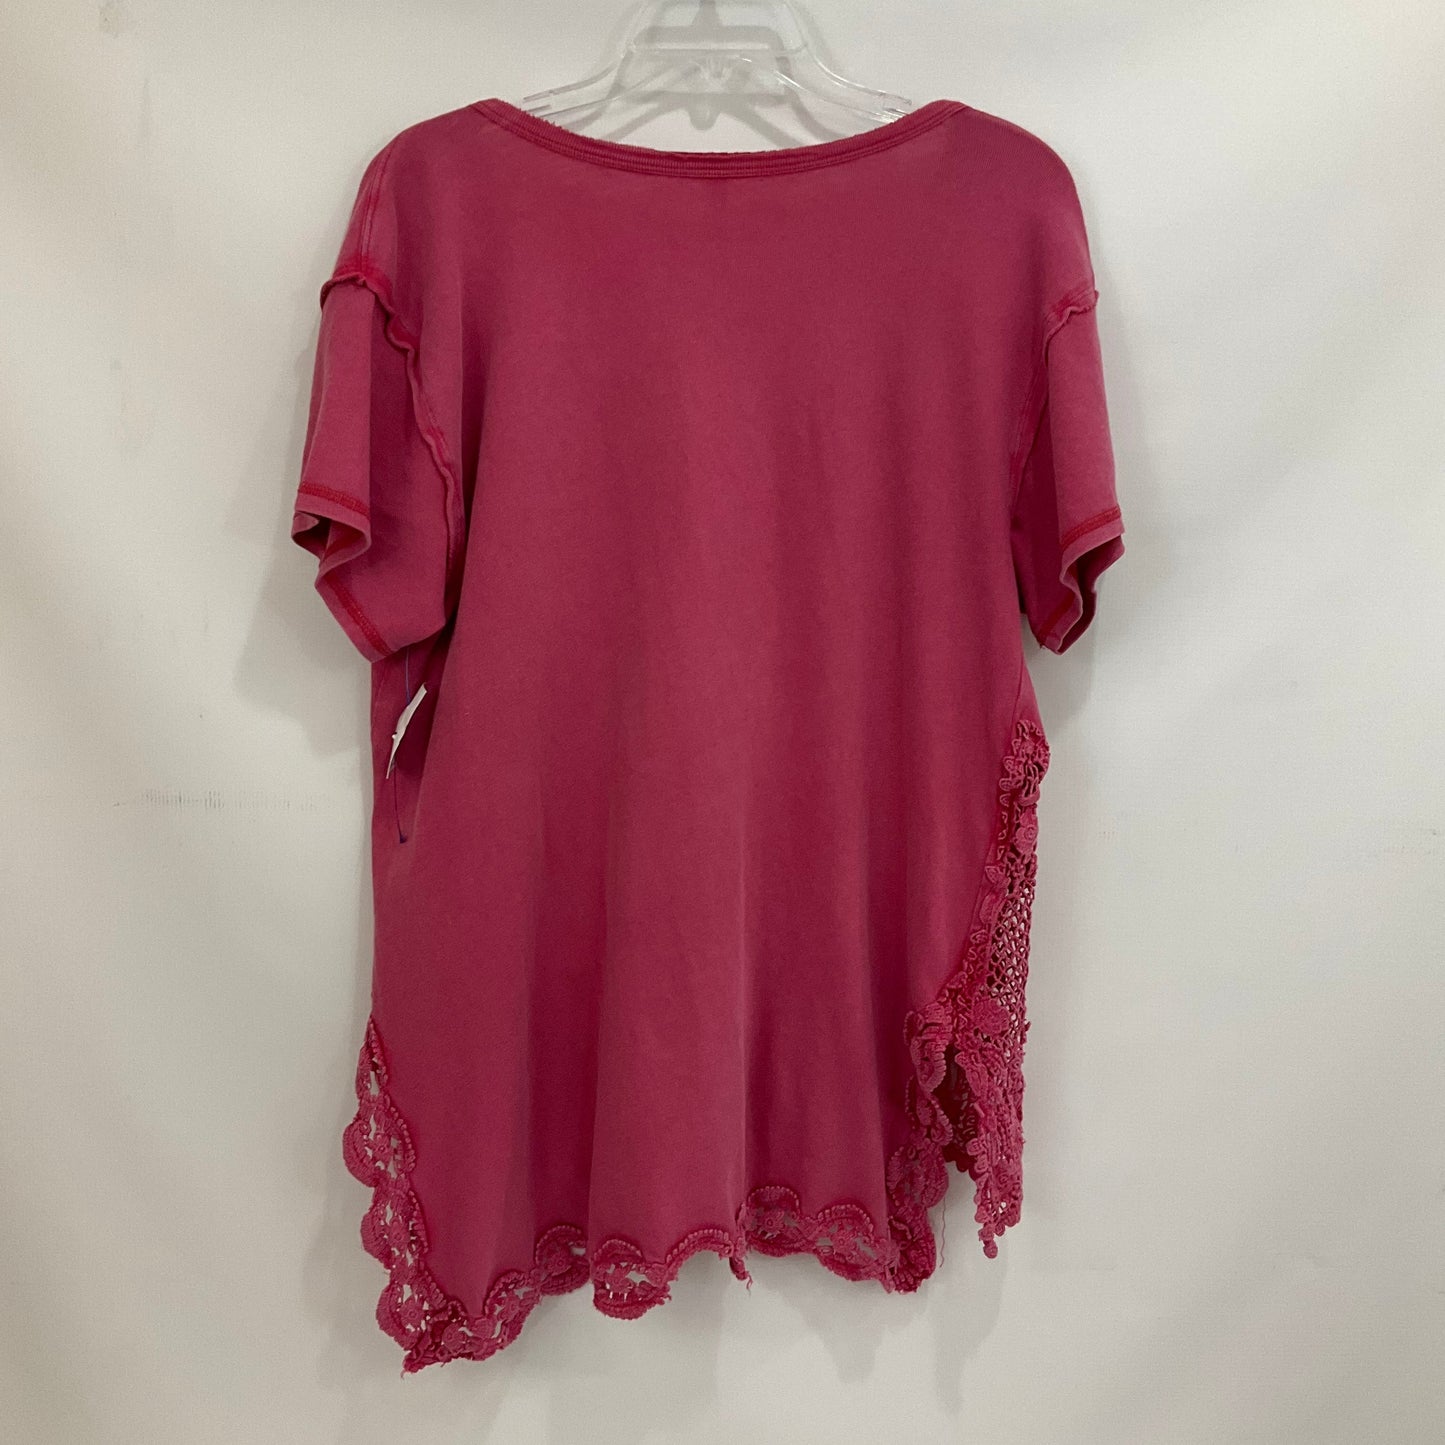 Pink Top Short Sleeve Free People, Size S